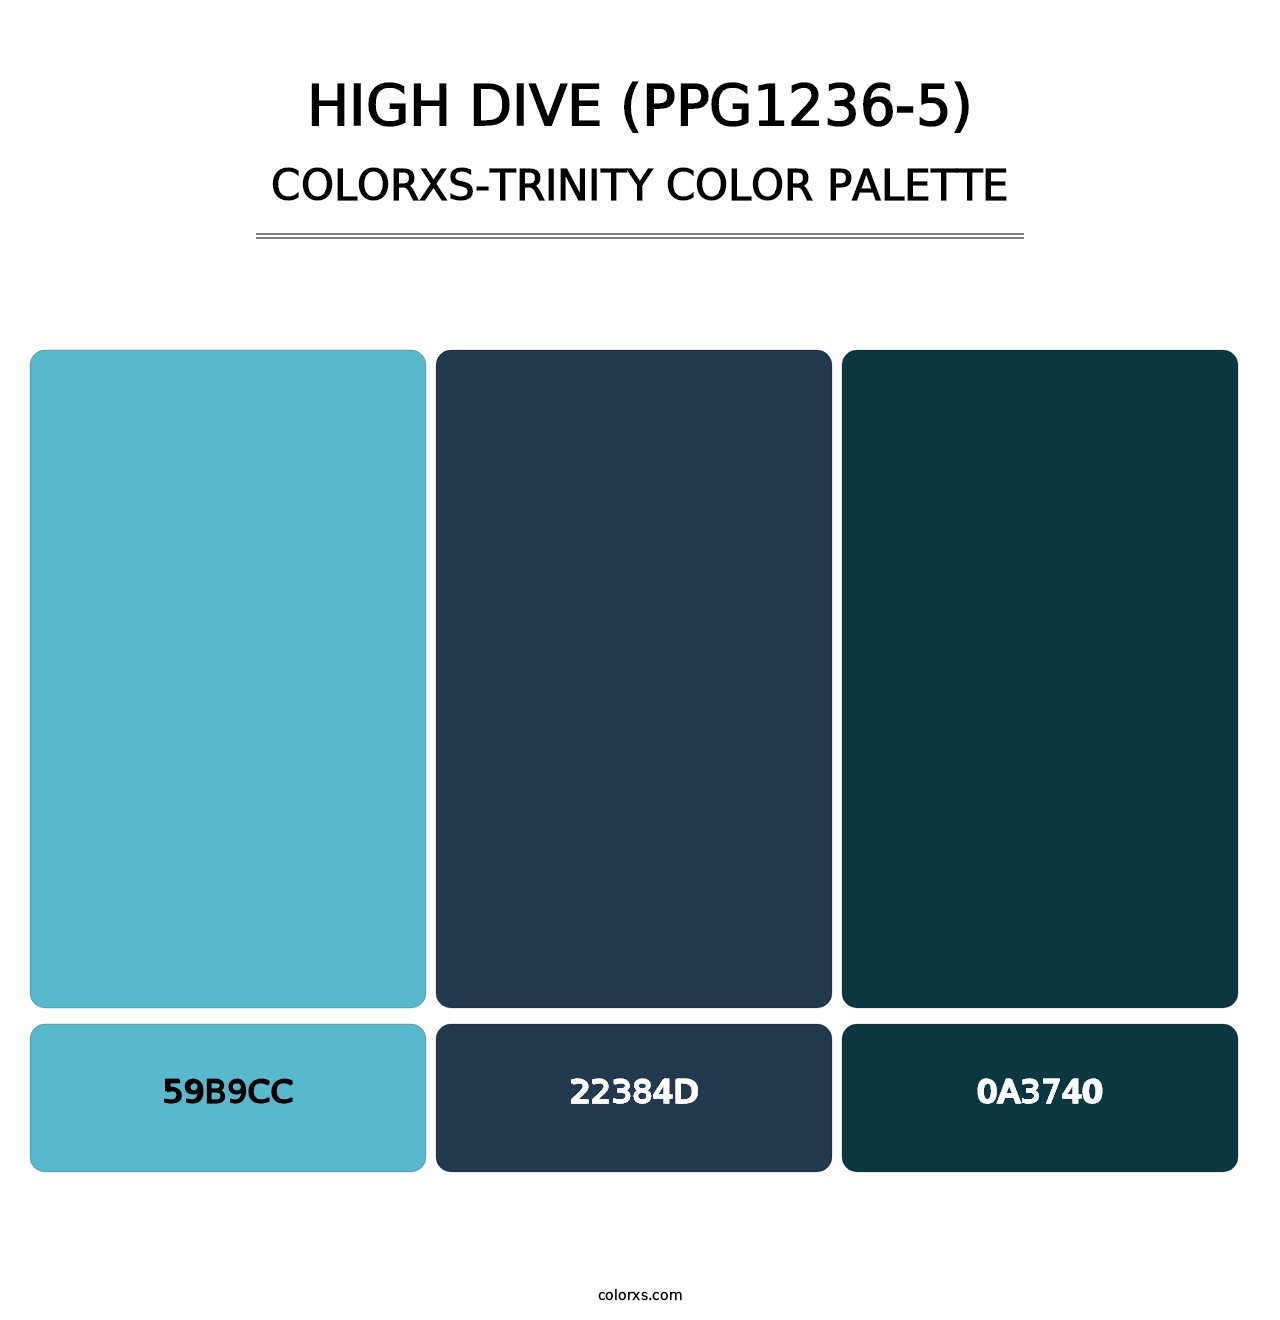 High Dive (PPG1236-5) - Colorxs Trinity Palette